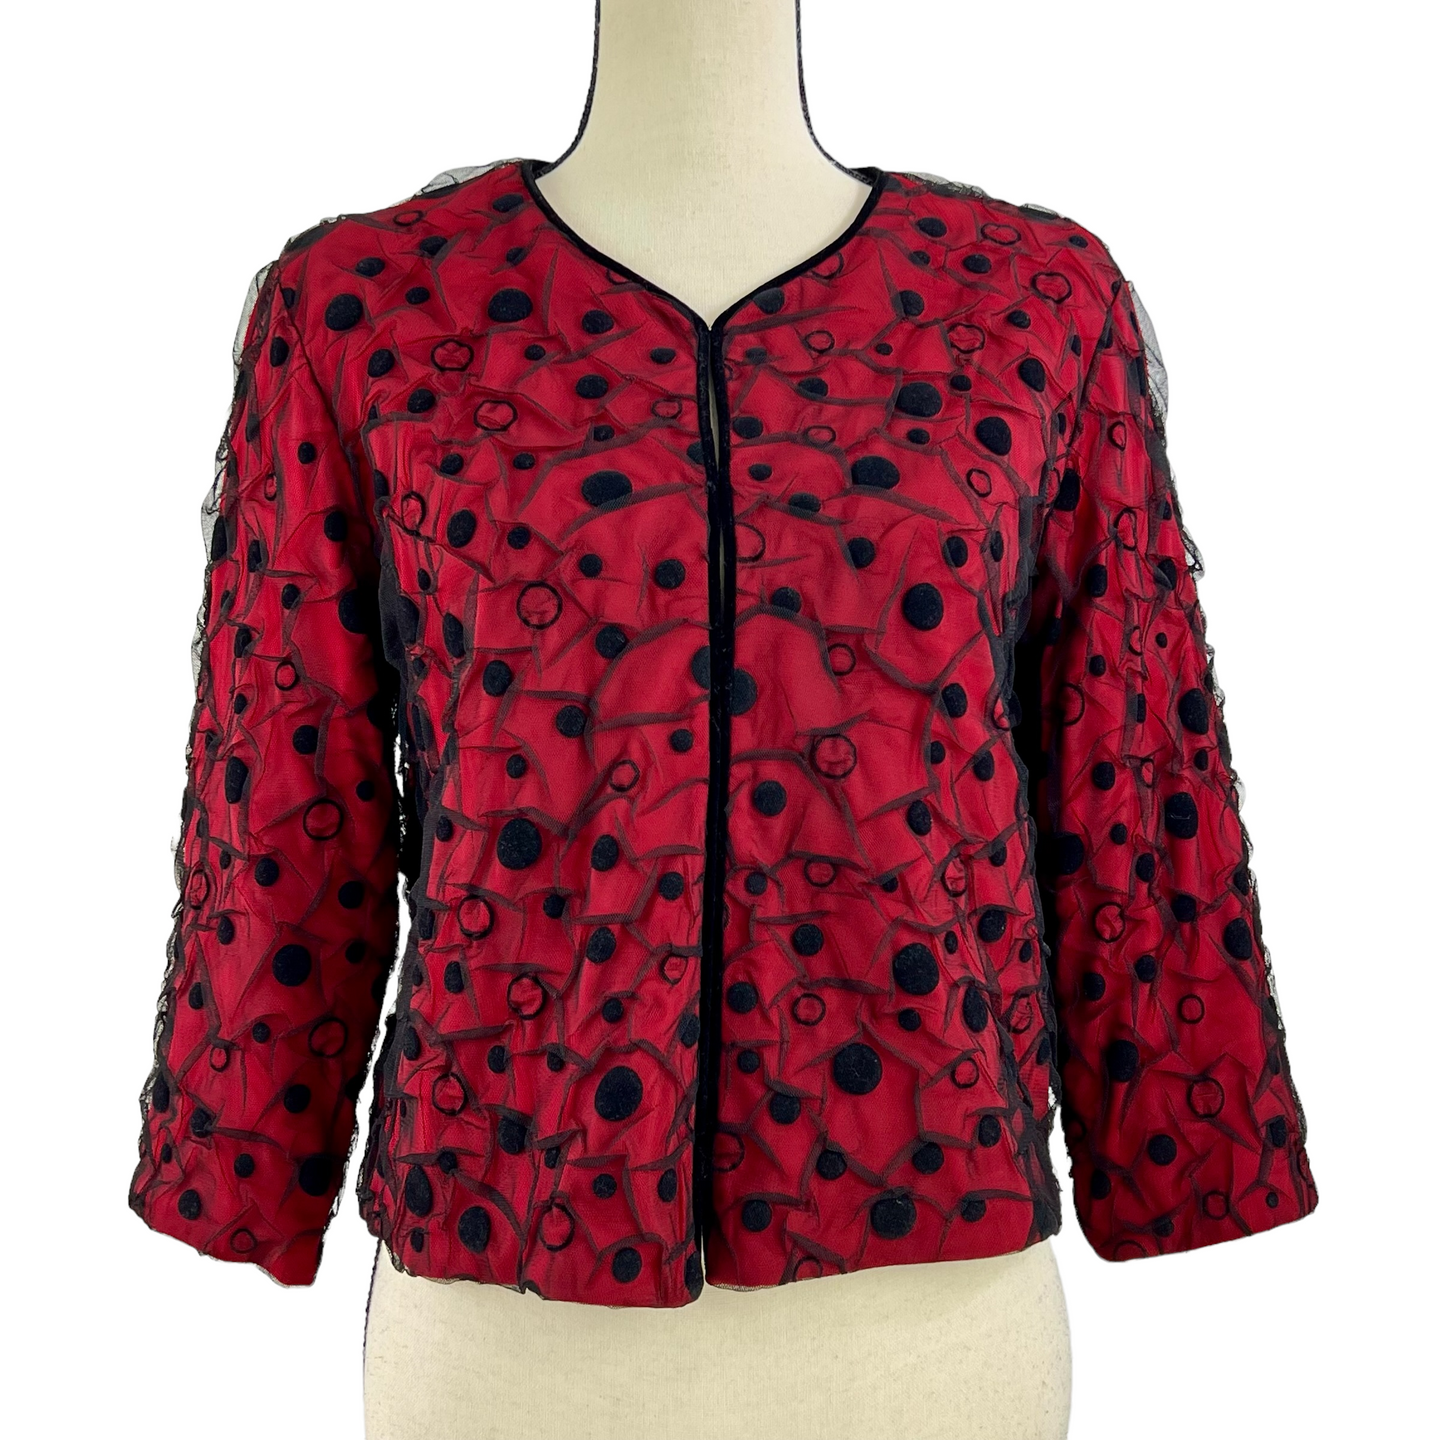 Ruby Red Polka Dot Black & Red Lace Jacket Size 8